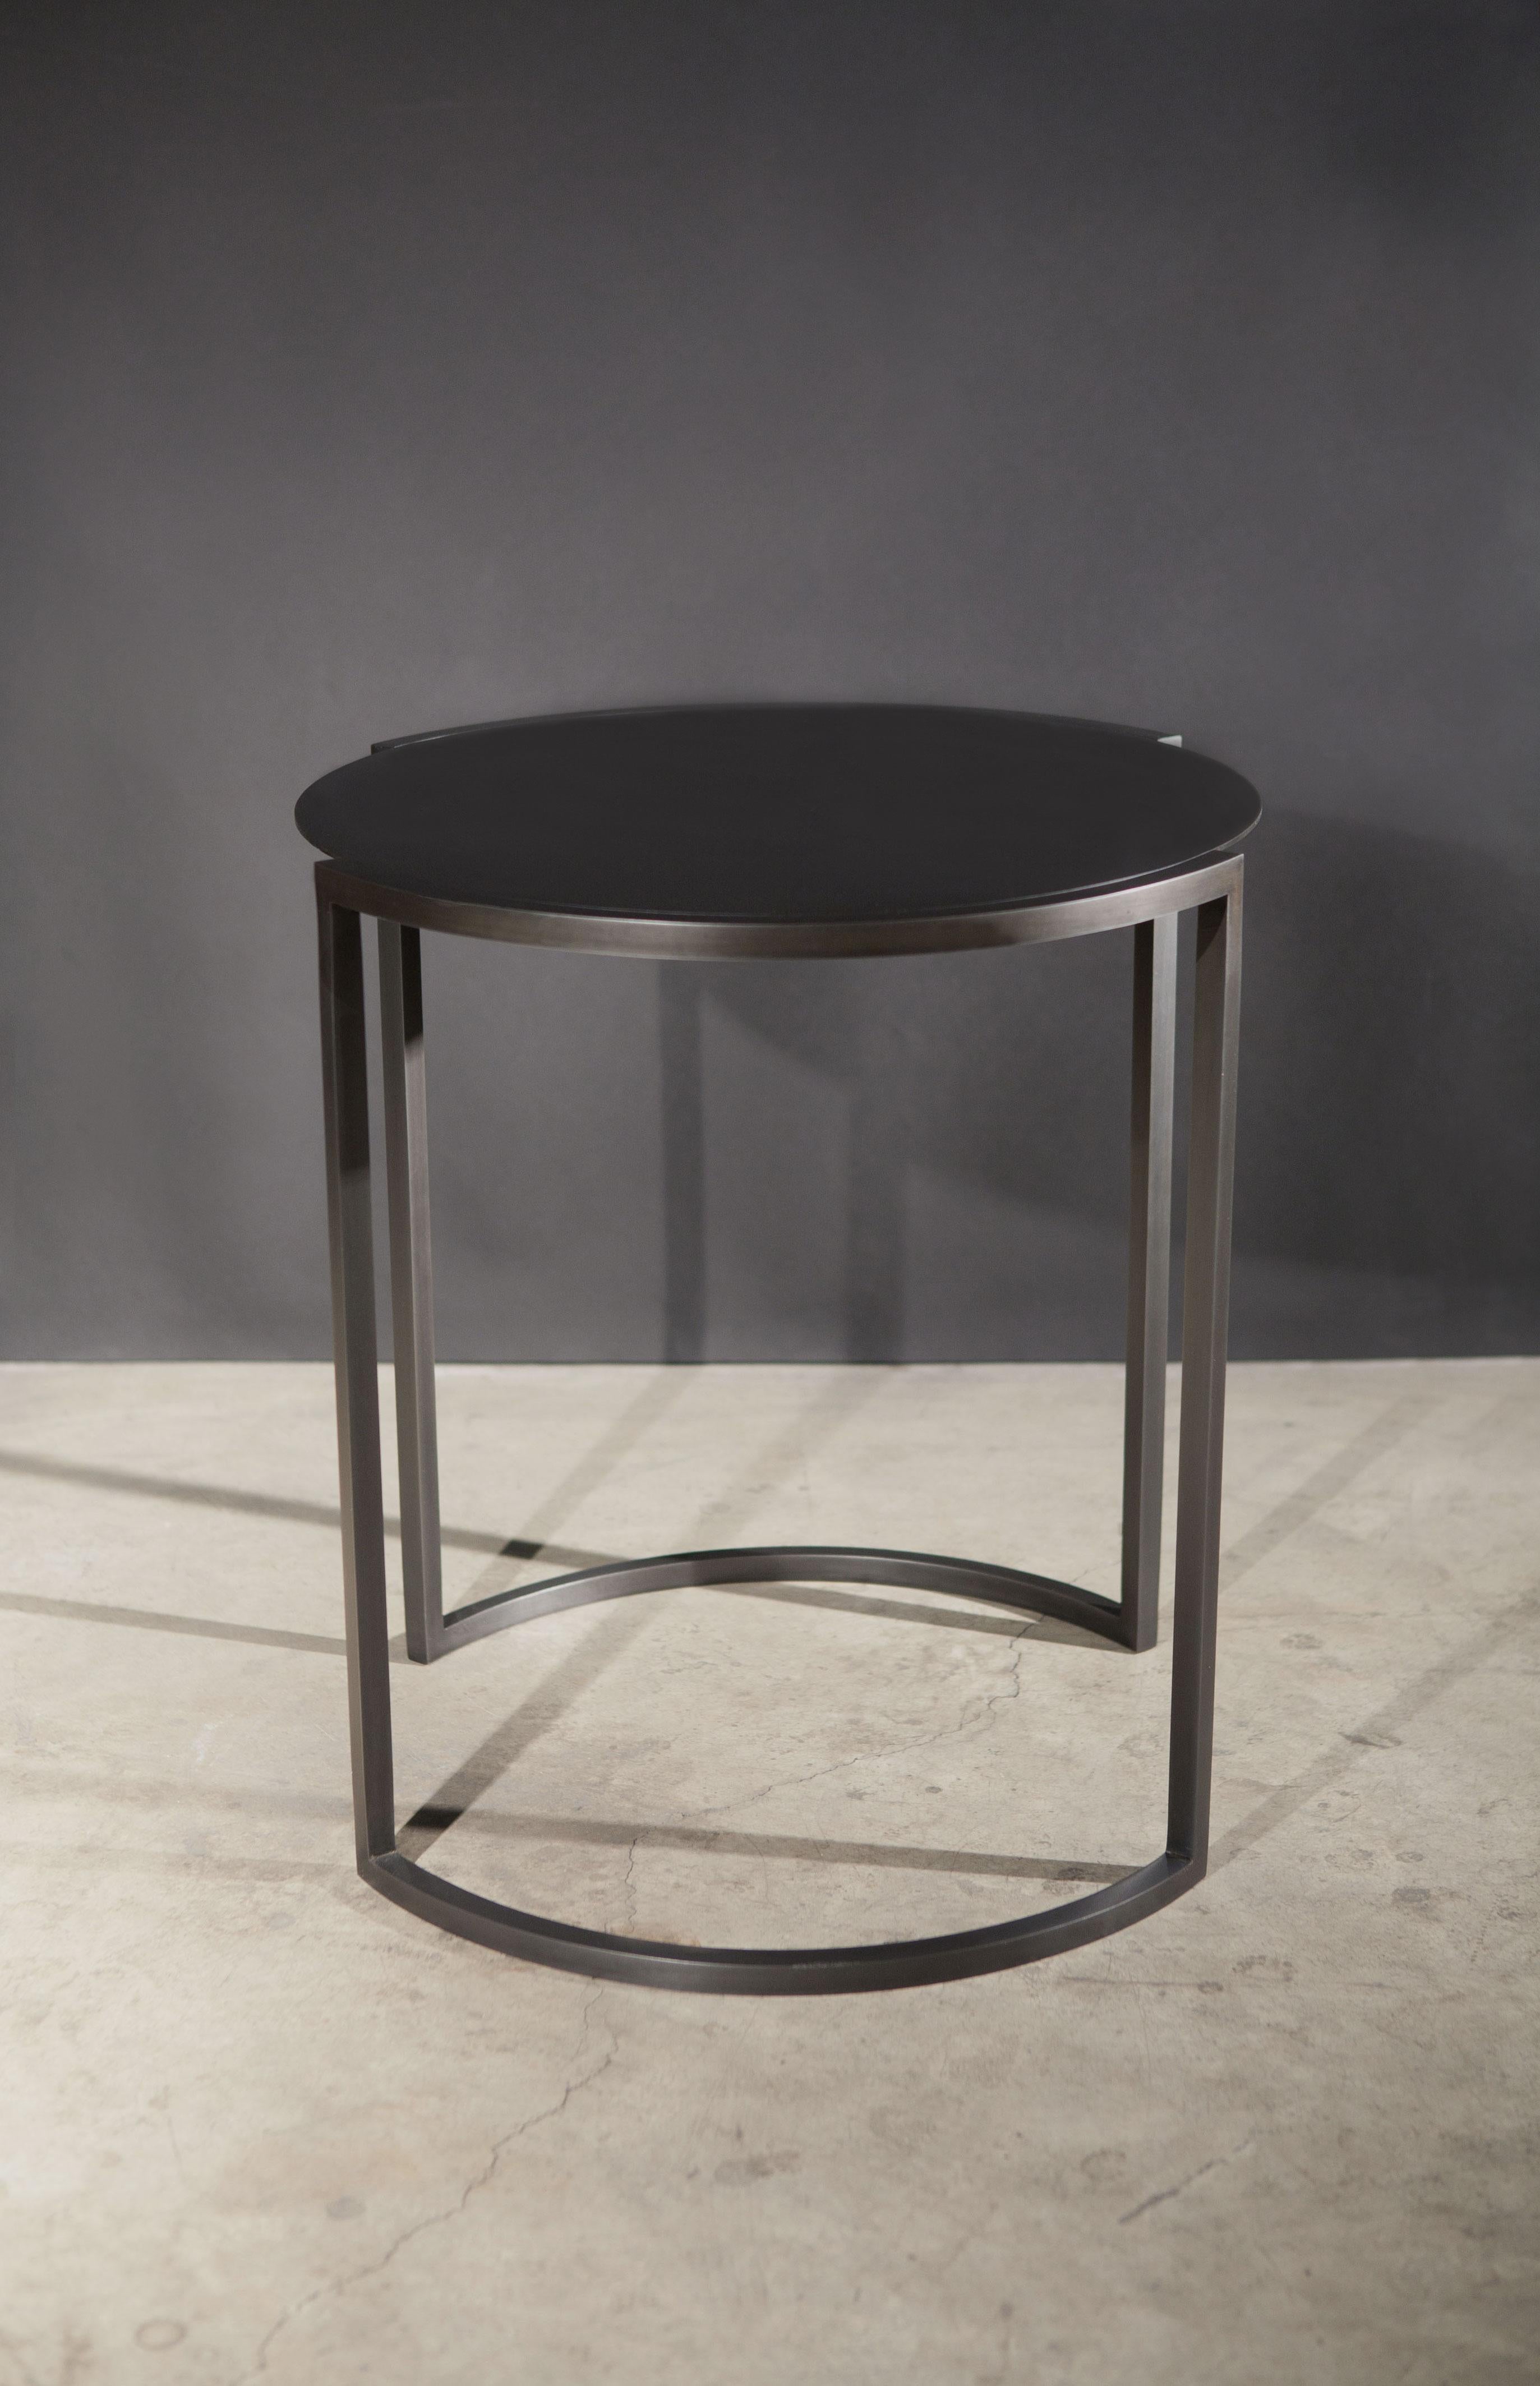 Solid arched steel legs outline the delicate blackened bronzed steel top of the Covet end table,
creating a balance of precision and elegance.

Customization and finishes available:
- Aged brass
- Powder-coated aluminum (for outdoor use)

Designed